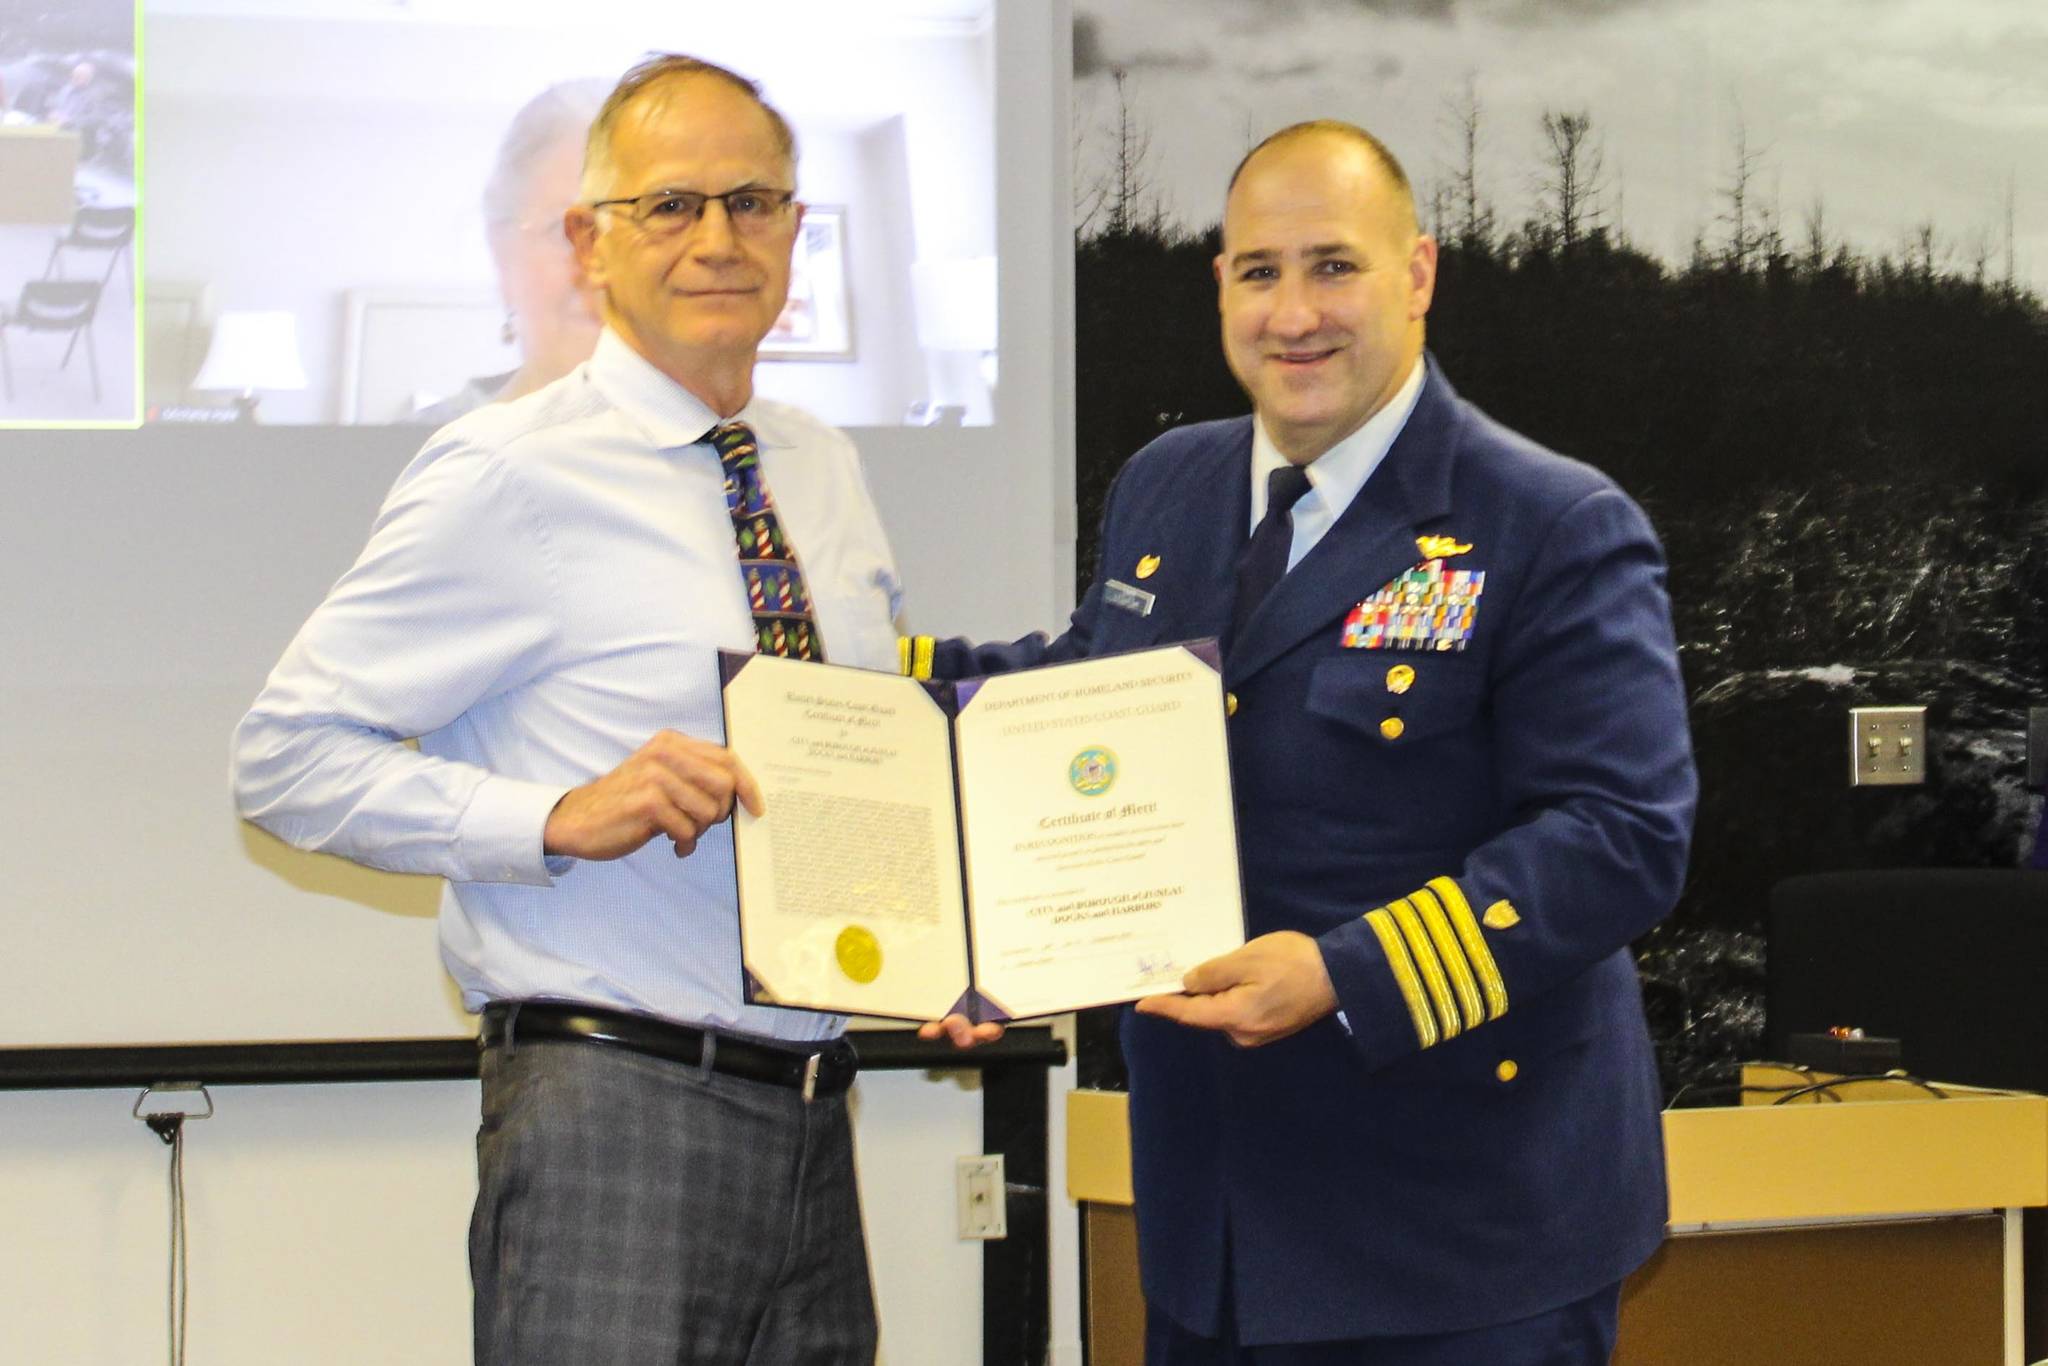 Capt. Stephen White, right, presents a commendation to City and Borough of Juneau Docks and Harbors port director Carl Uchytil during an Assembly meeting on May 24, 2021. (Dana Zigmund / Juneau Empire)